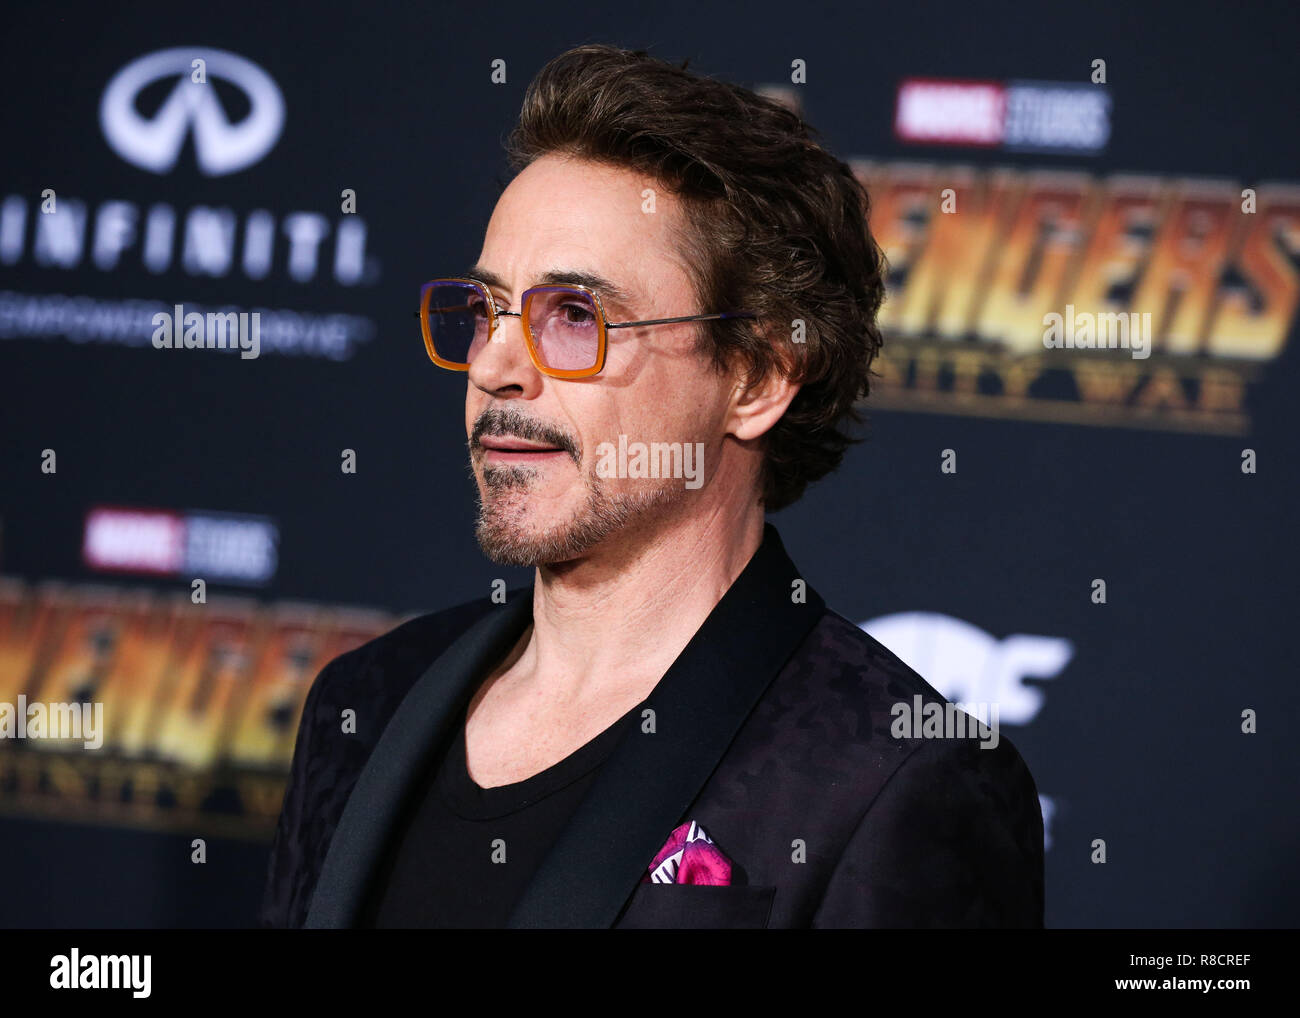 HOLLYWOOD, LOS ANGELES, CA, USA - APRIL 23: Robert Downey Jr. at the World Premiere Of Disney And Marvel's 'Avengers: Infinity War' held at the El Capitan Theatre, Dolby Theatre and TCL Chinese Theatre IMAX on April 23, 2018 in Hollywood, Los Angeles, California, United States. (Photo by Xavier Collin/Image Press Agency) Stock Photo